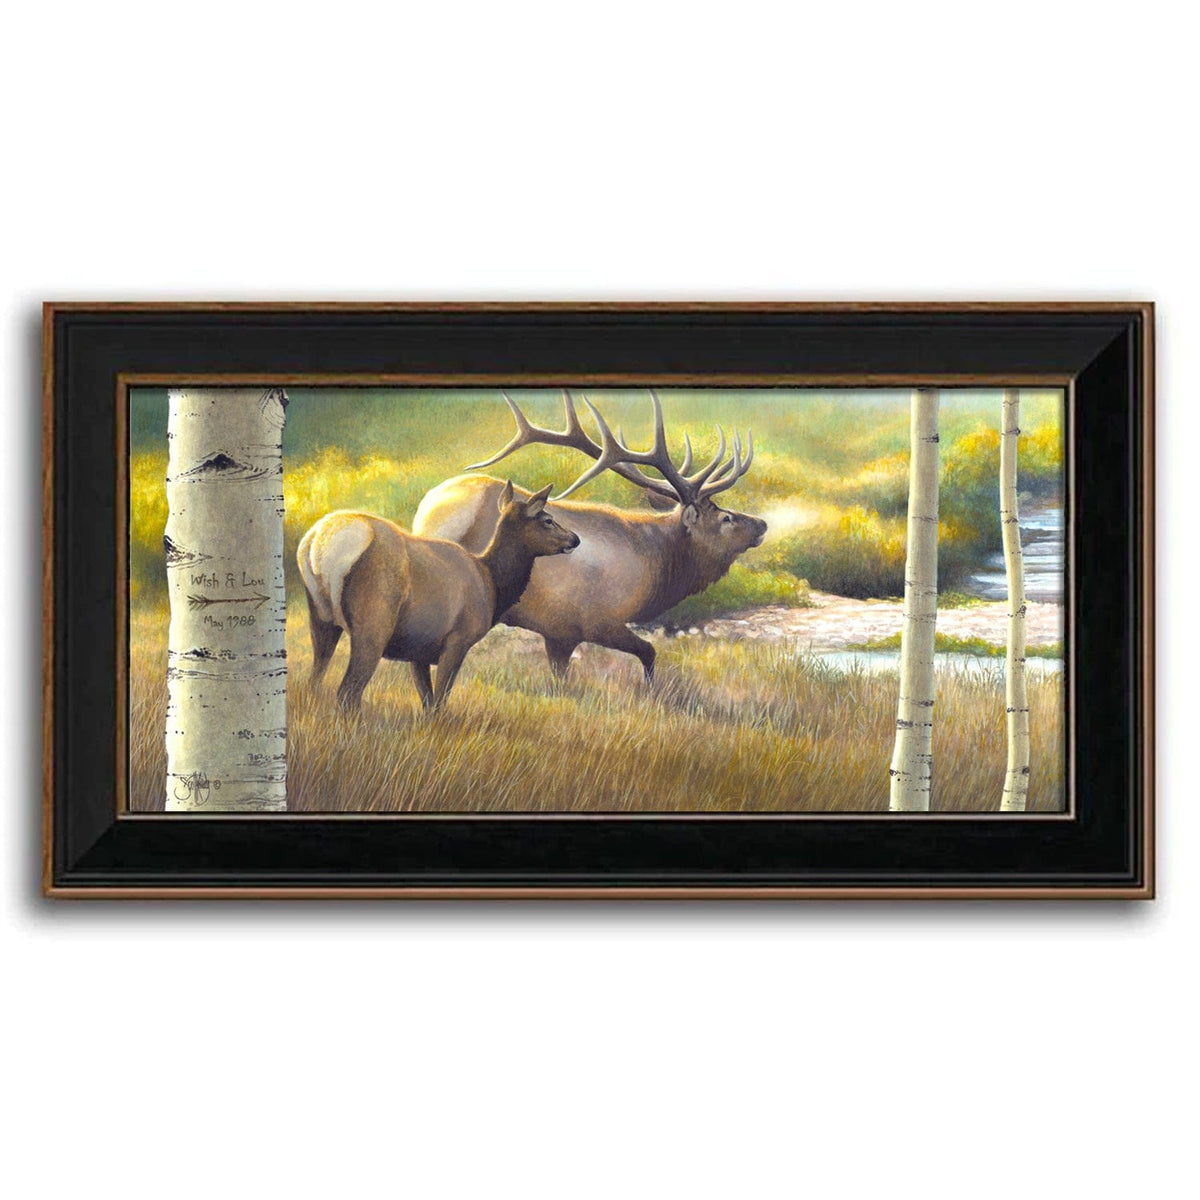 Nature wall decor of two elk in a green field and aspen trees - Personal-Prints